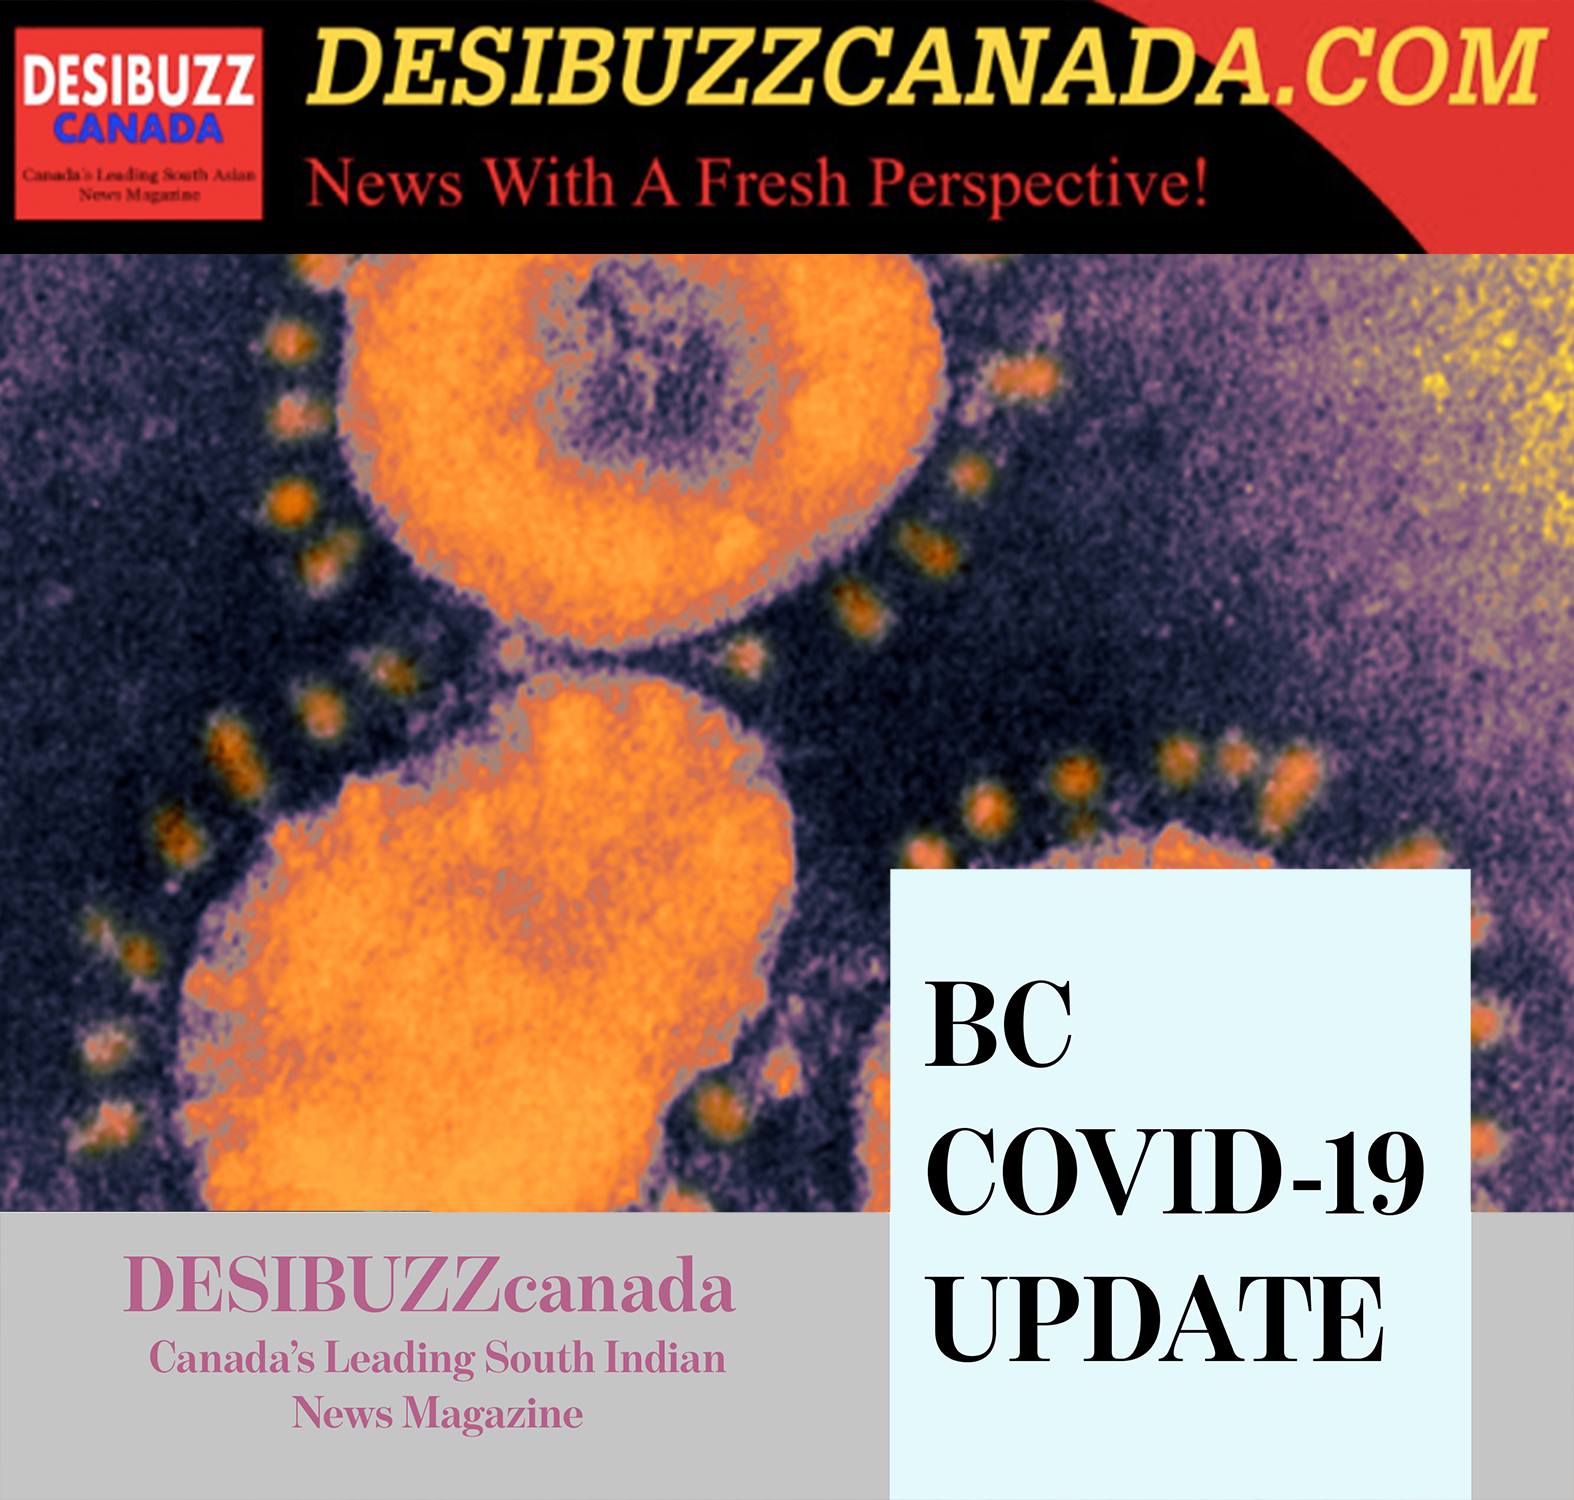 BC COVID-19 UPDATE: Eight Deaths And Over 300 Cases Reported Friday